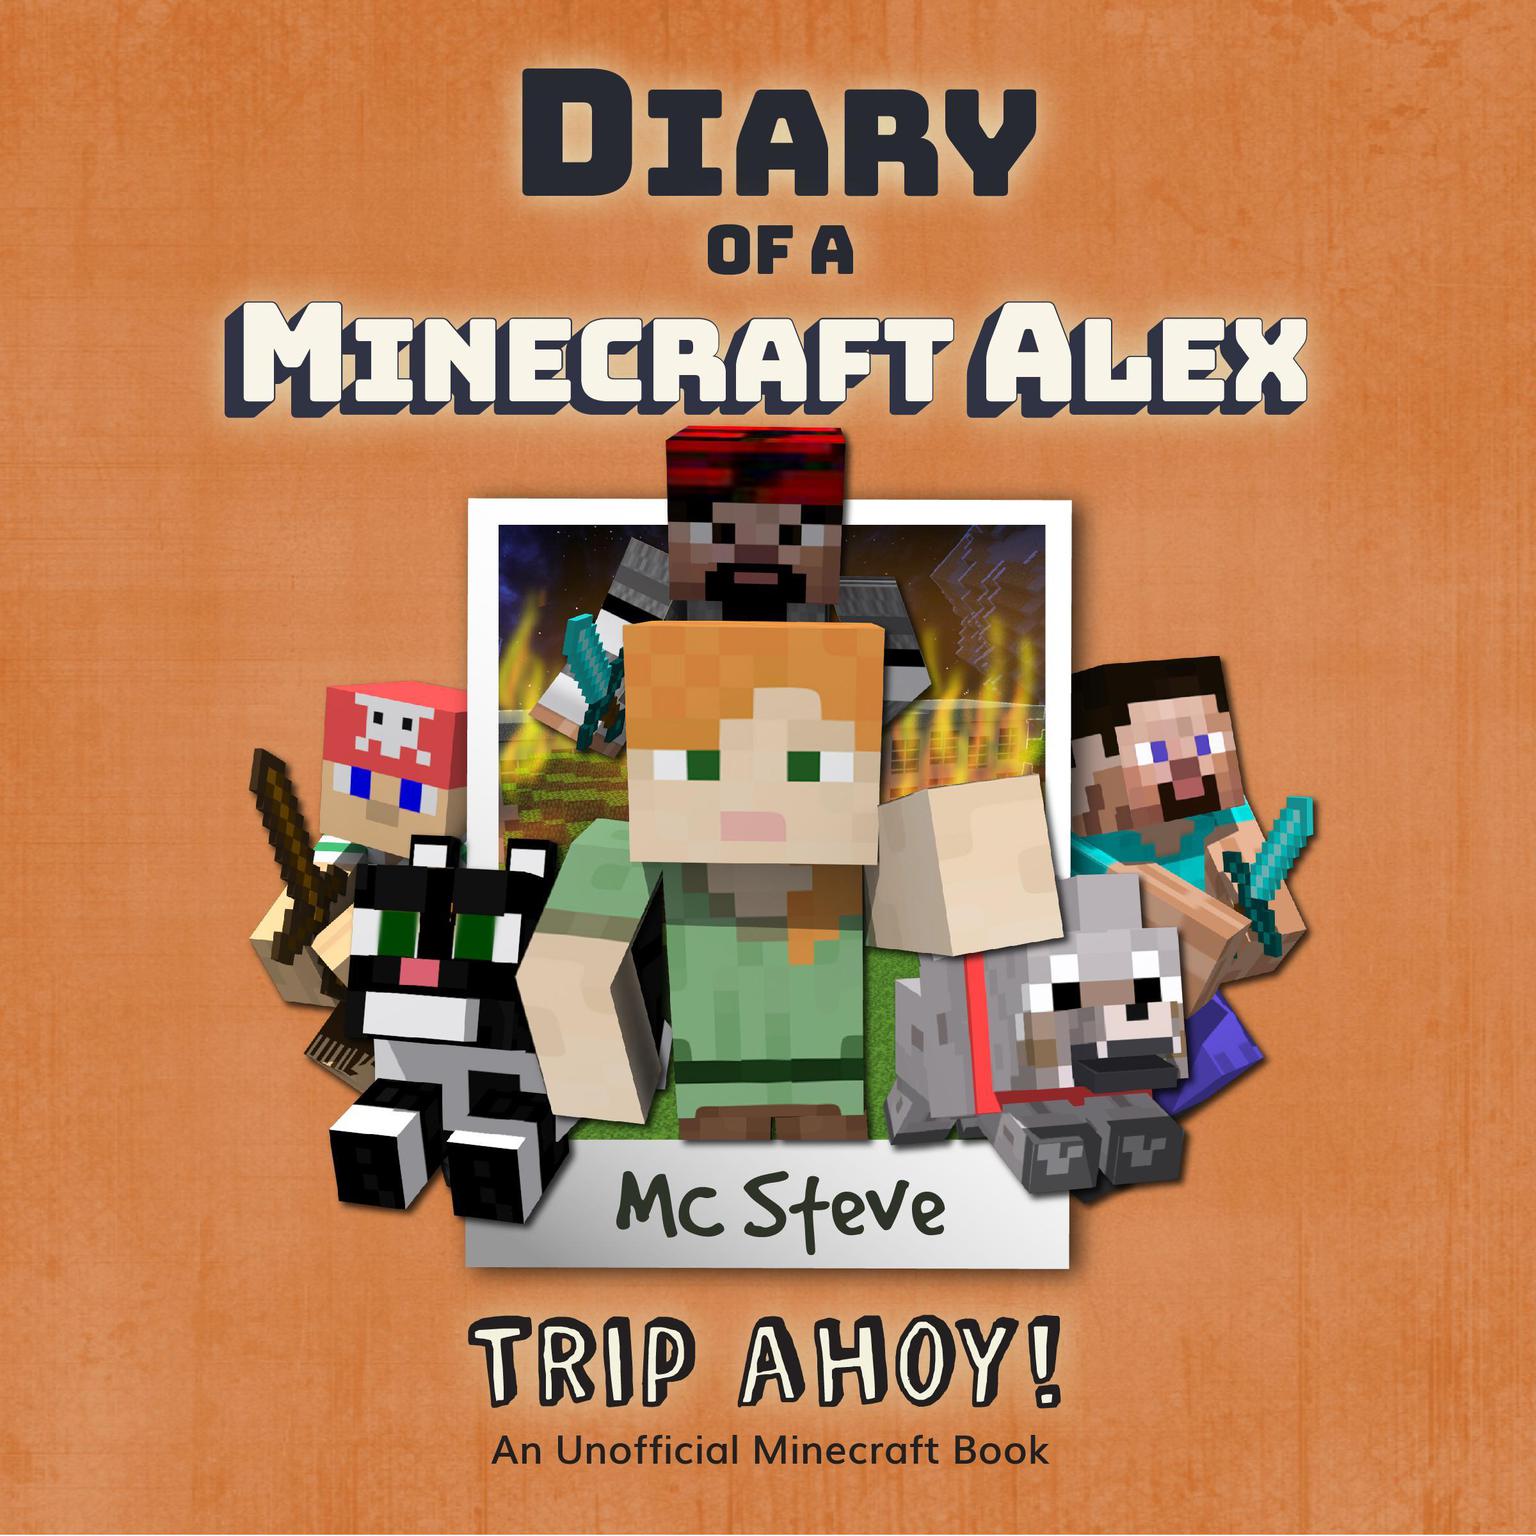 Diary of a Minecraft Alex Book 6: Trip Ahoy! (An Unofficial Minecraft Diary Book) Audiobook, by MC Steve